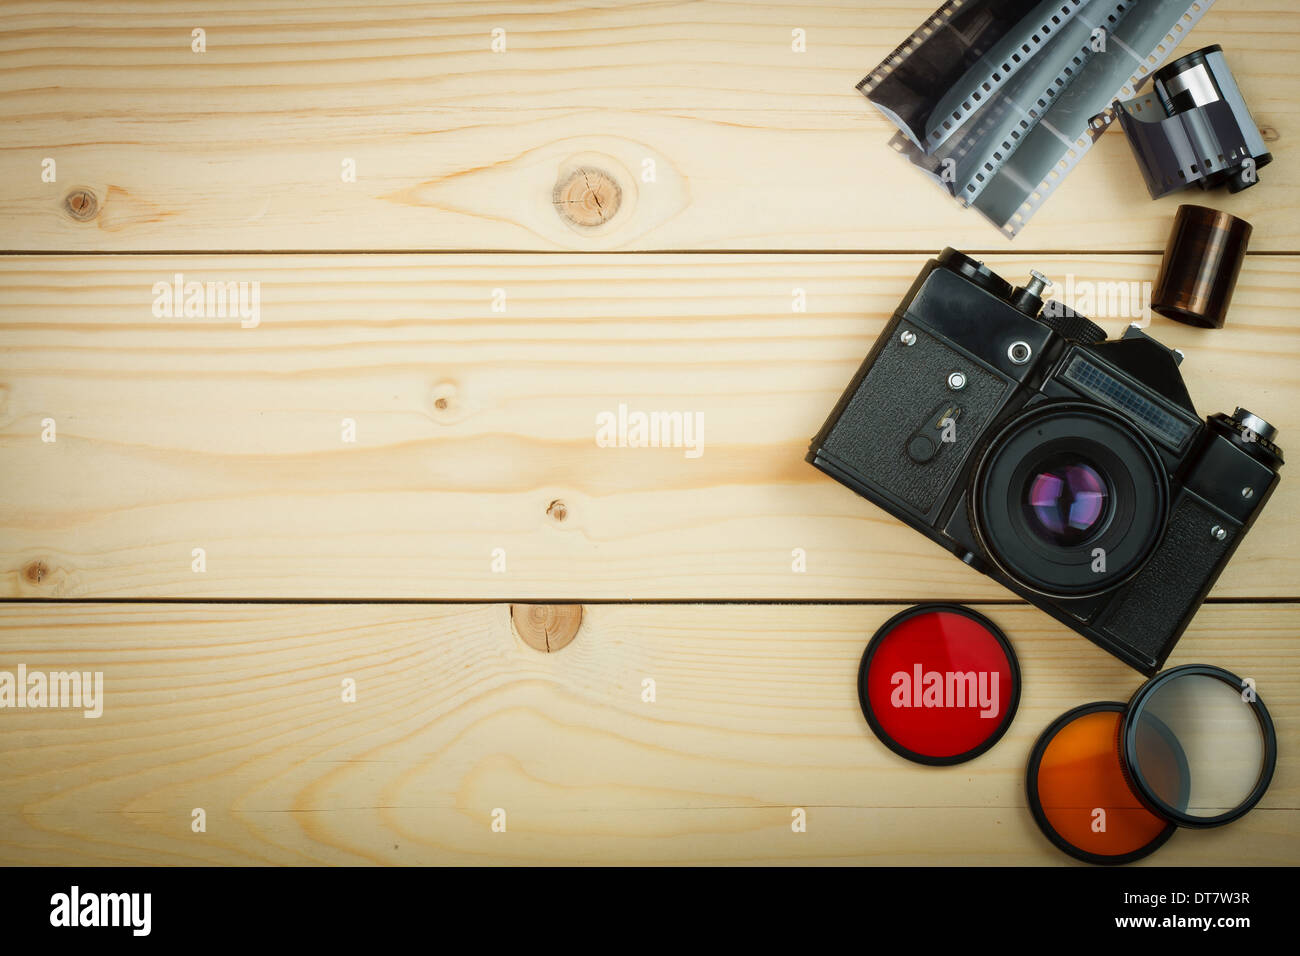 Old retro camera and film roll on wooden boards. Focus on camera. Abstract background Stock Photo